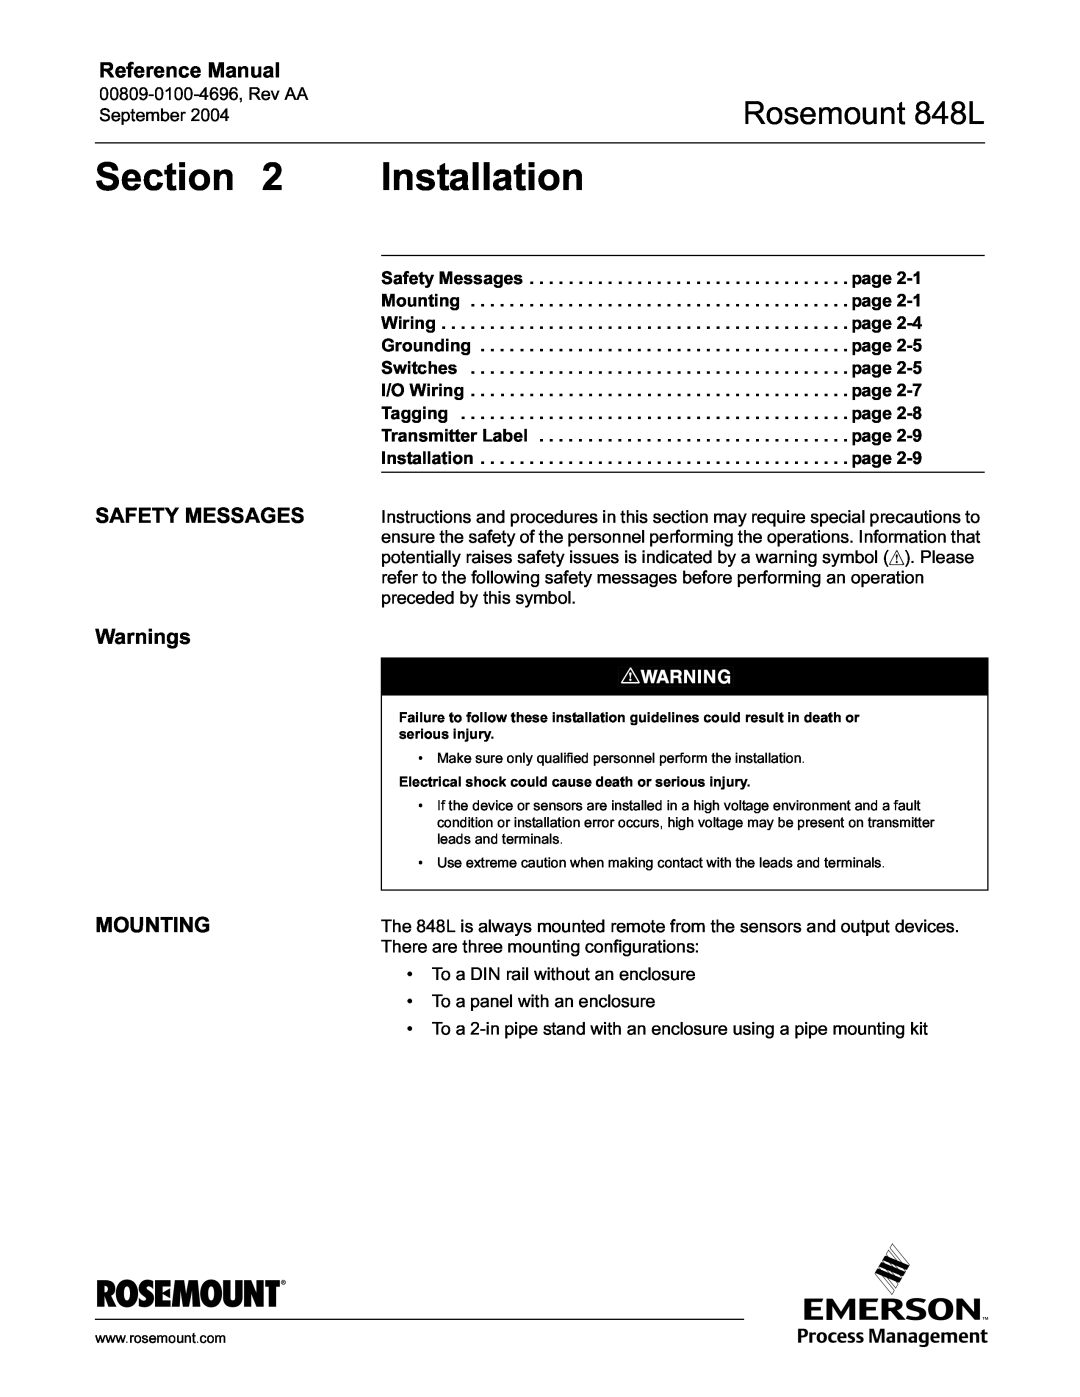 Emerson manual Installation, SAFETY MESSAGES Warnings MOUNTING, Section, Rosemount 848L, Reference Manual 